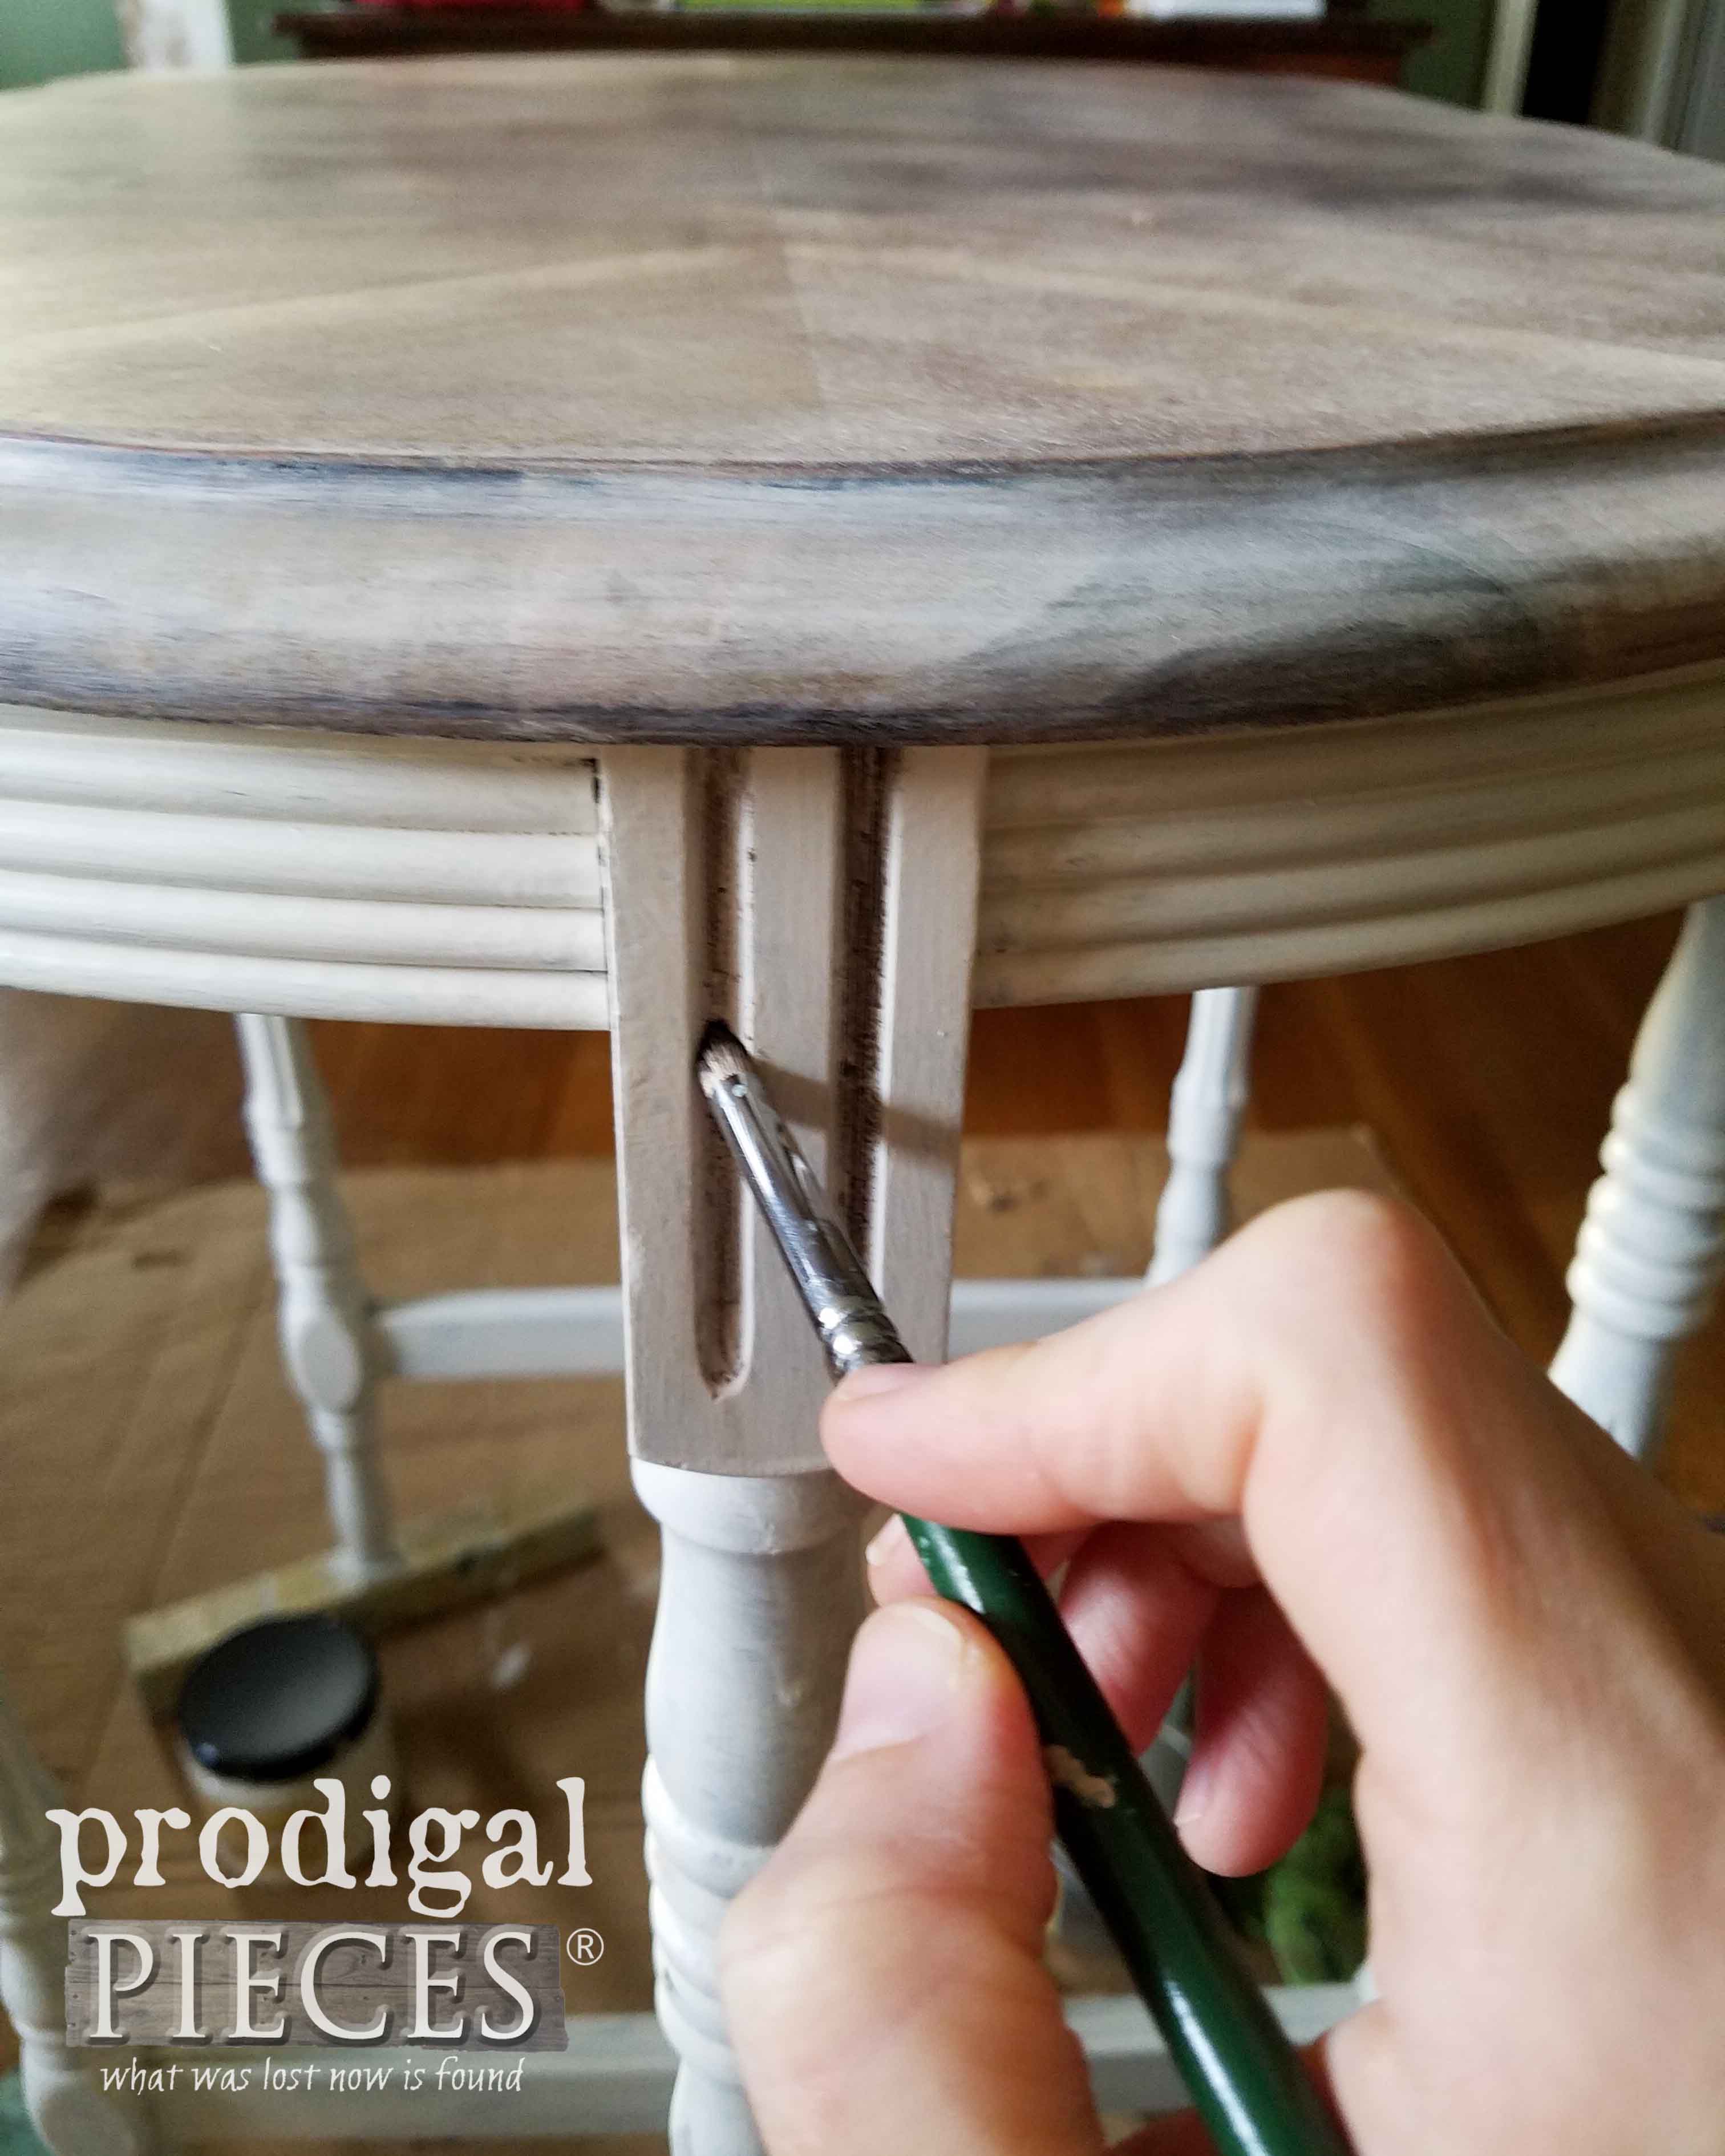 Adding Brown Wax to Highlight Details of this Antique Side Table by Prodigal Pieces | prodigalpieces.com